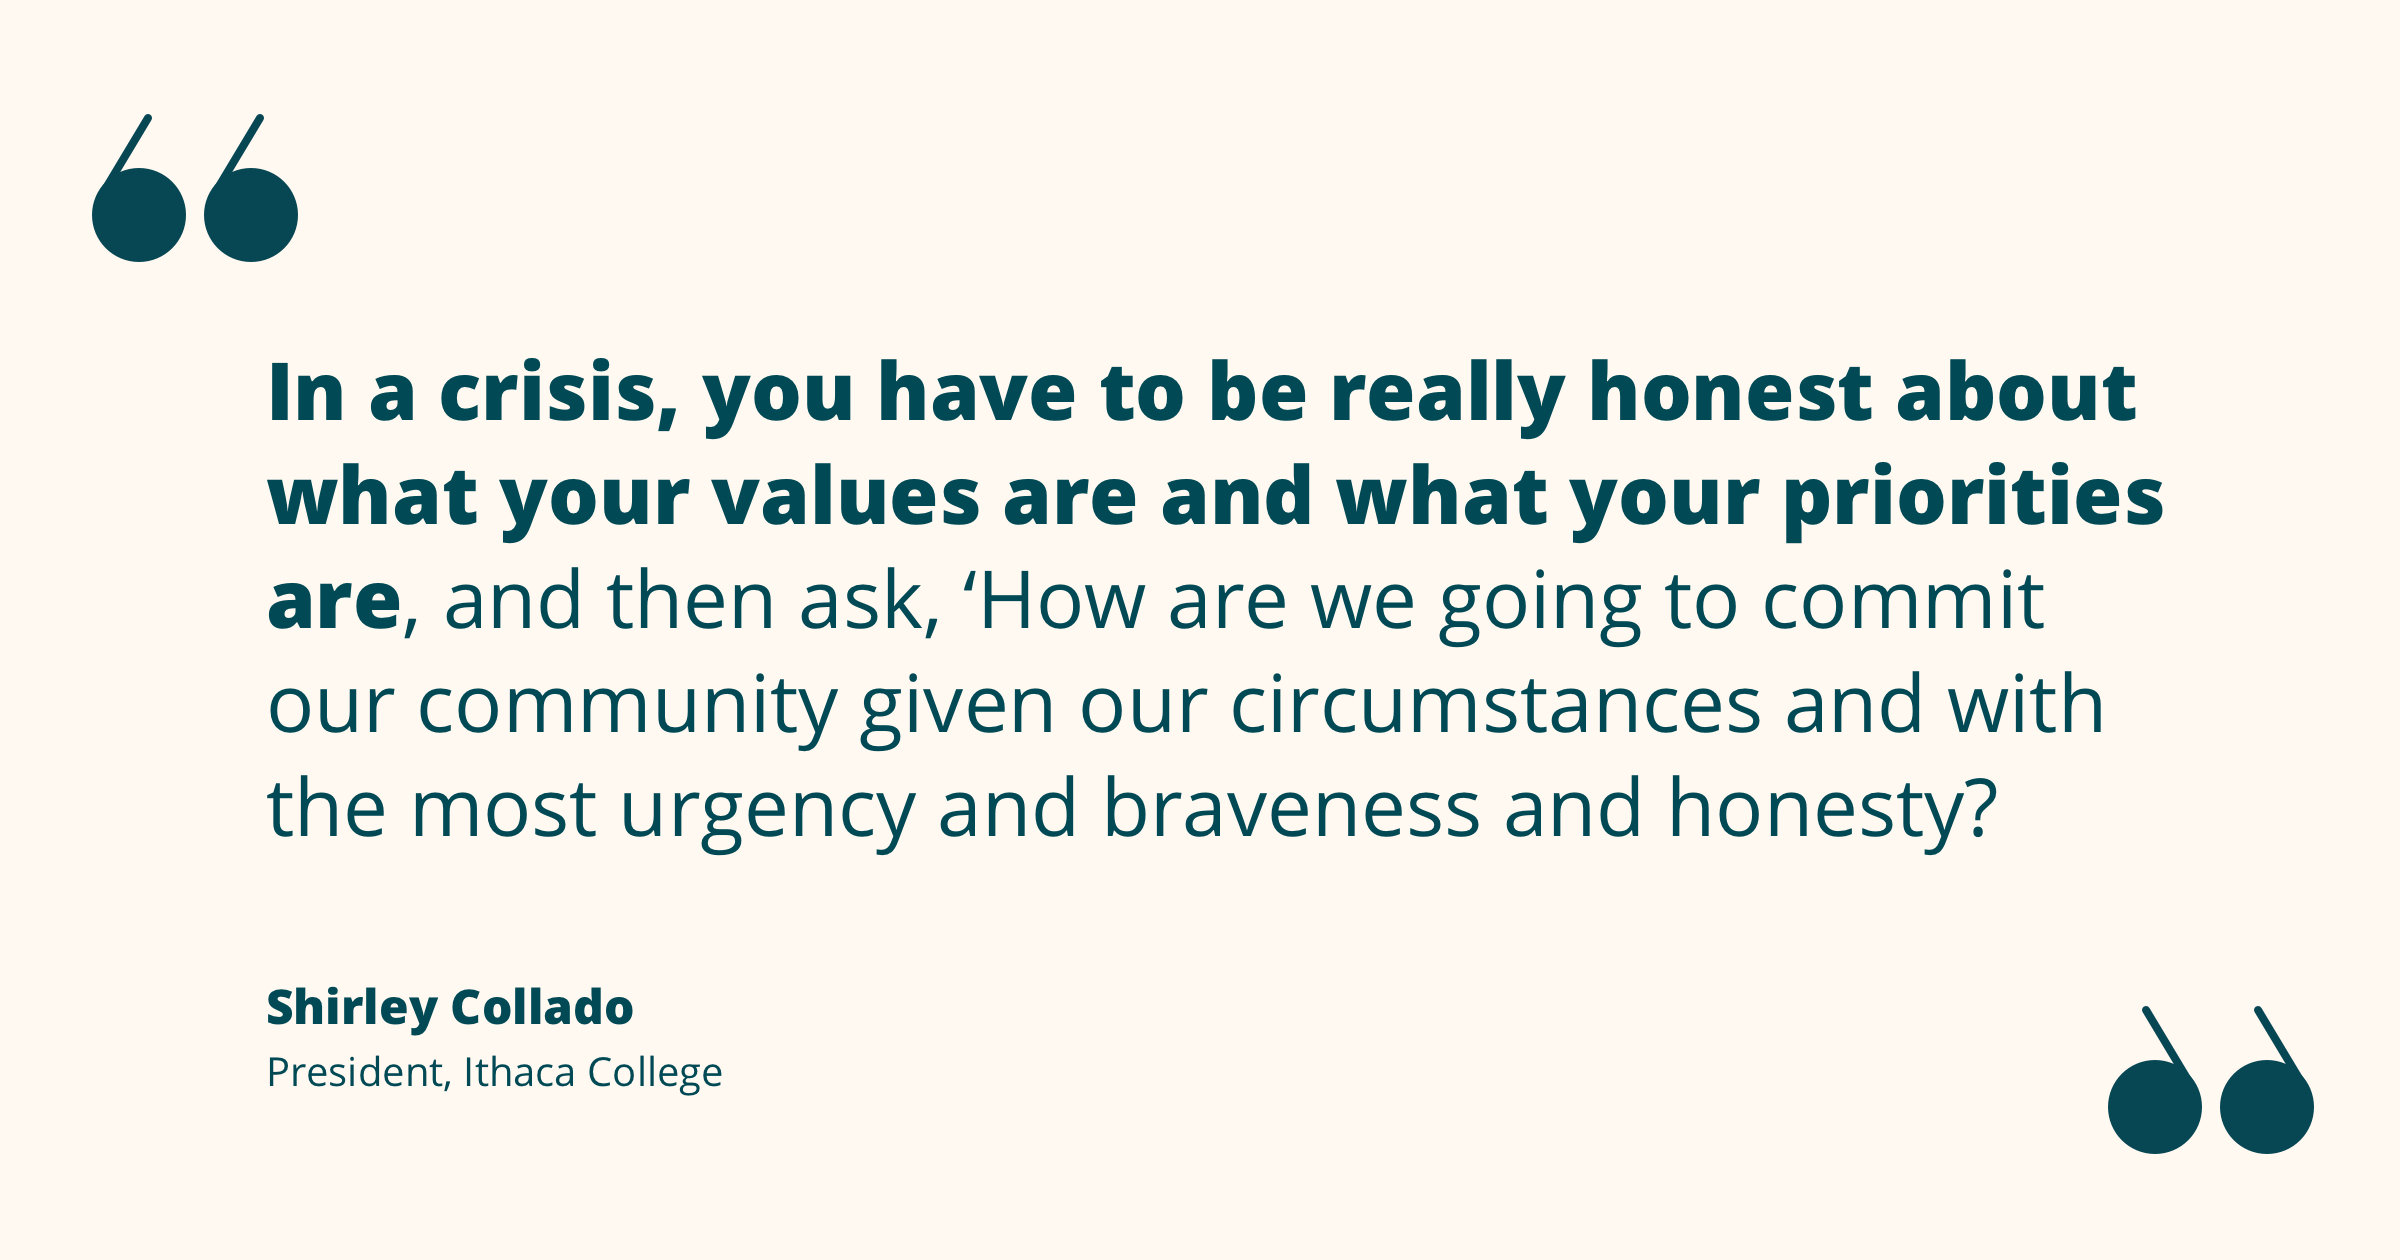 Quote from Shirley Collado re: honesty about values and priorities in a crisis, and commitment to community.